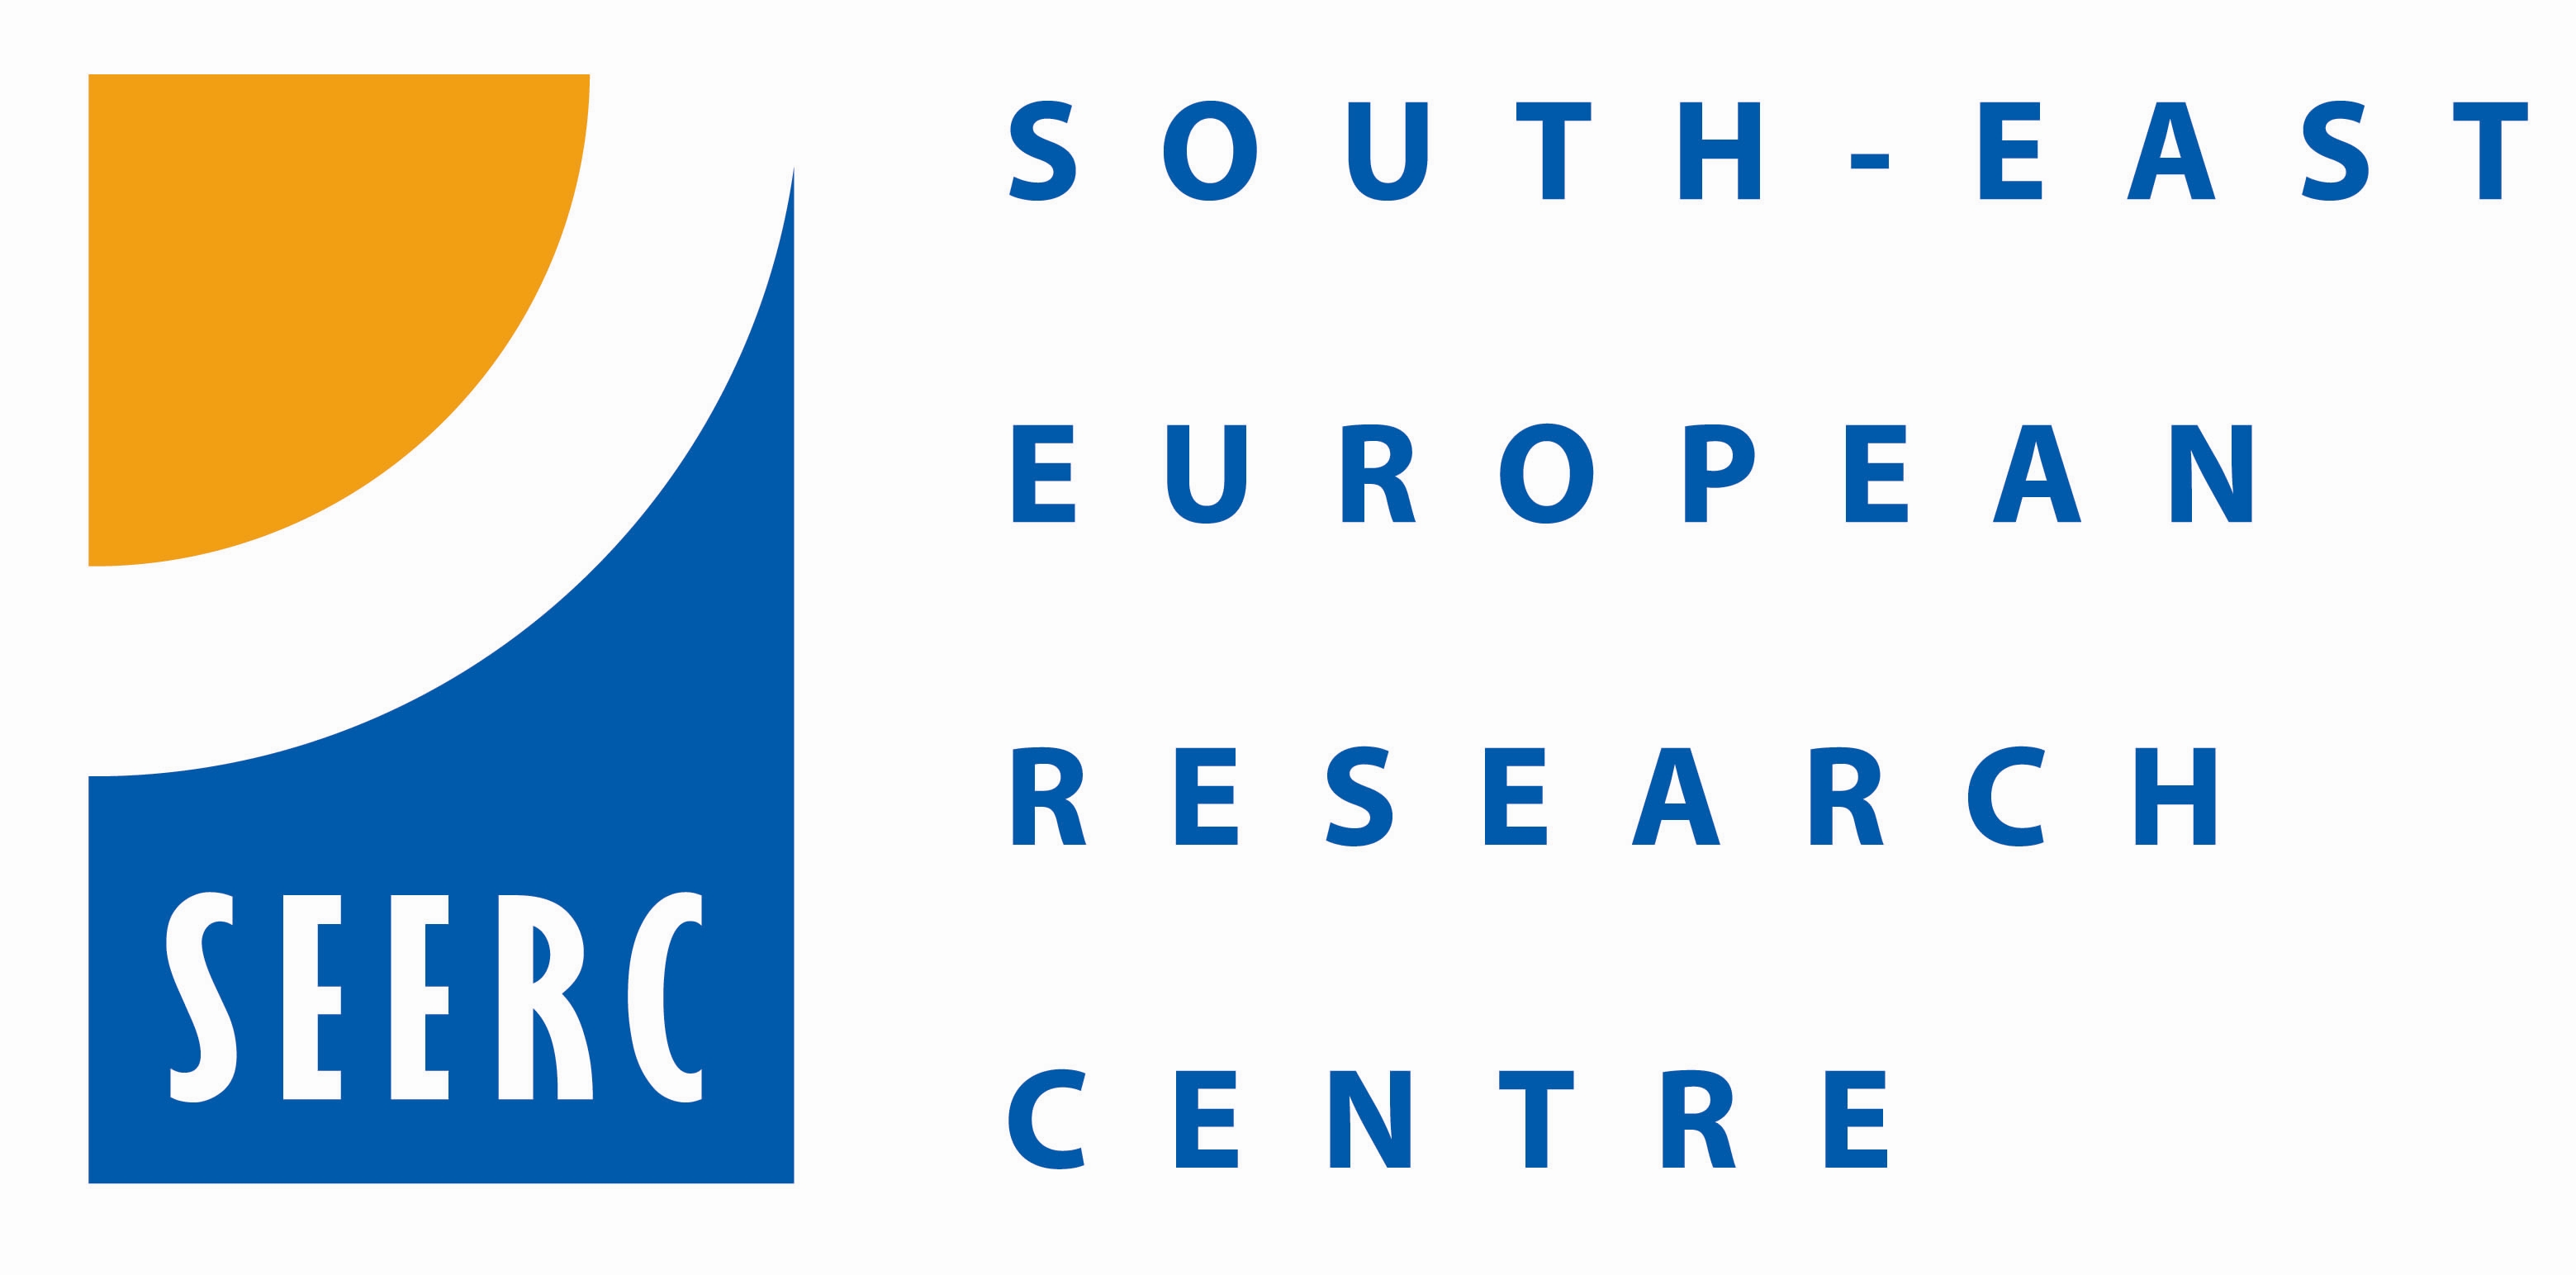 The South East European Research Centre (SEERC) seeks candidates 